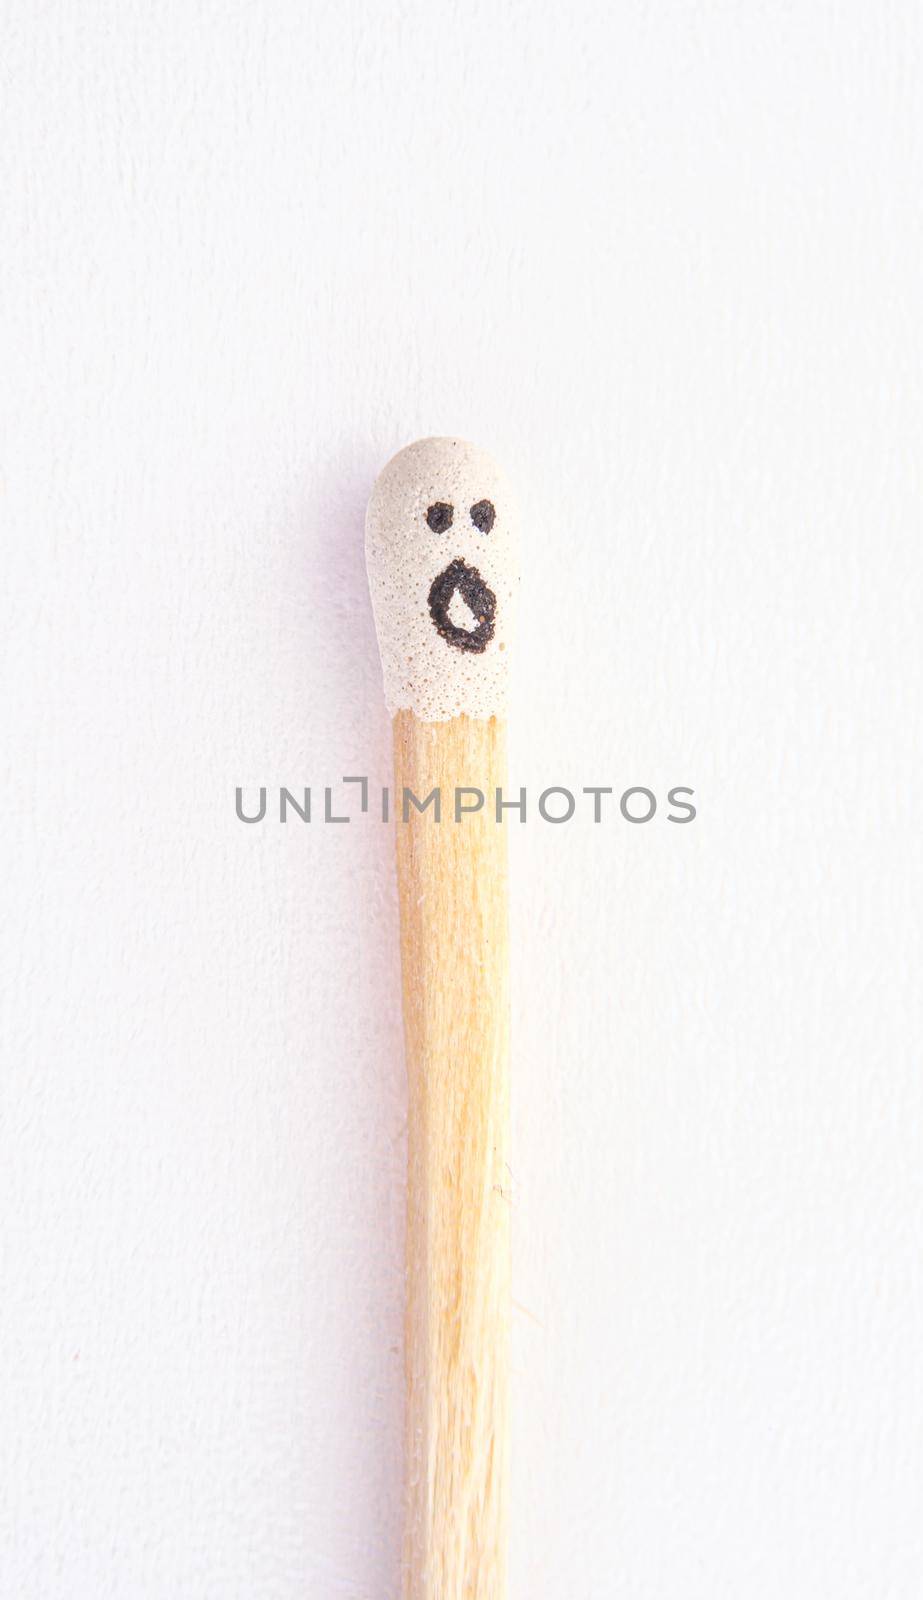 matchstick with faces painted on the heads